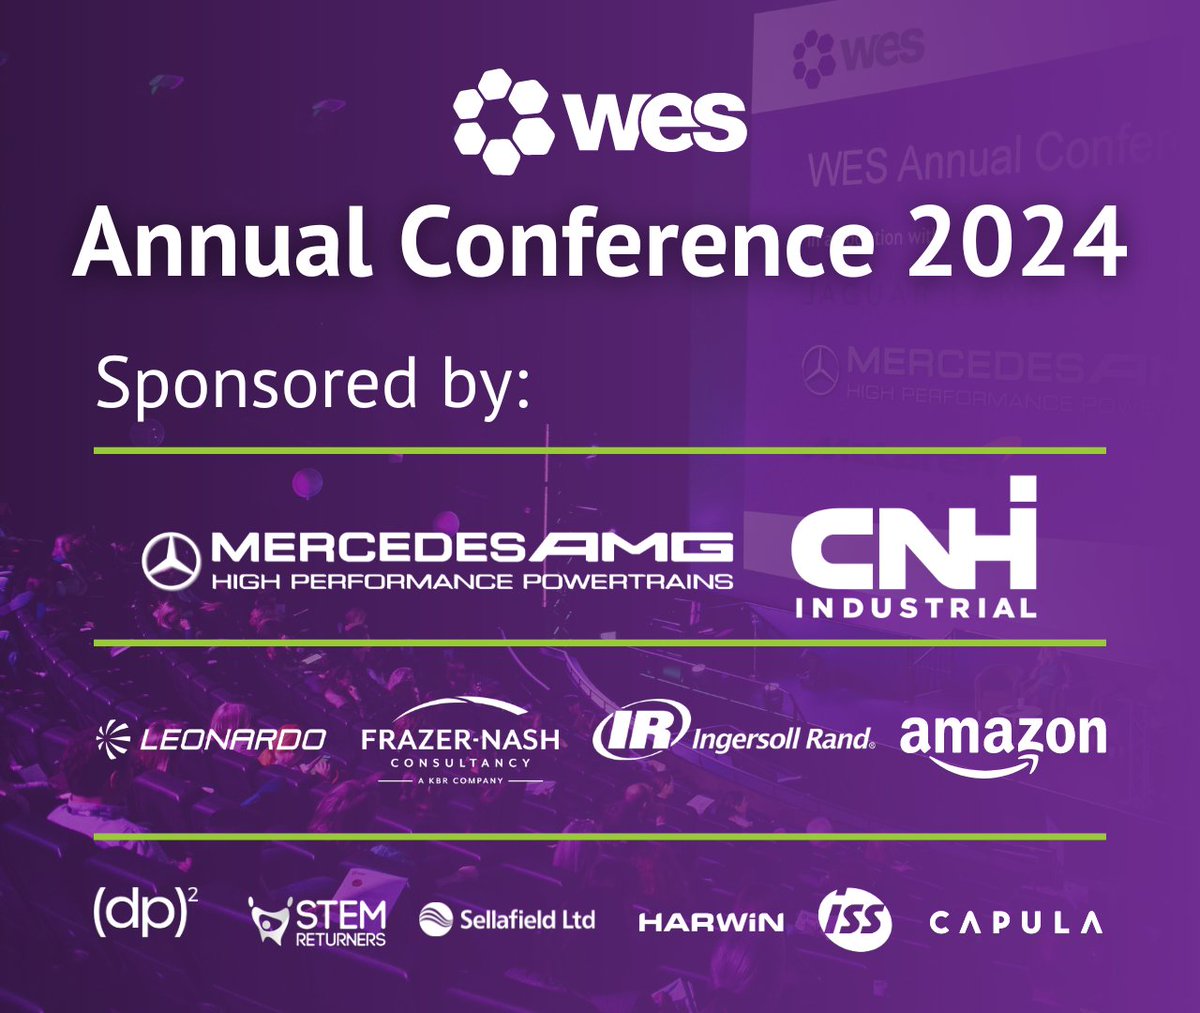 Thanks to our sponsors, we’re bringing together the best minds in Engineering for an unforgettable #AnnualConference It wouldn't be possible without their commitment to supporting WES and #WomenEngineers across the UK, which is why we are proud to call them our partners!